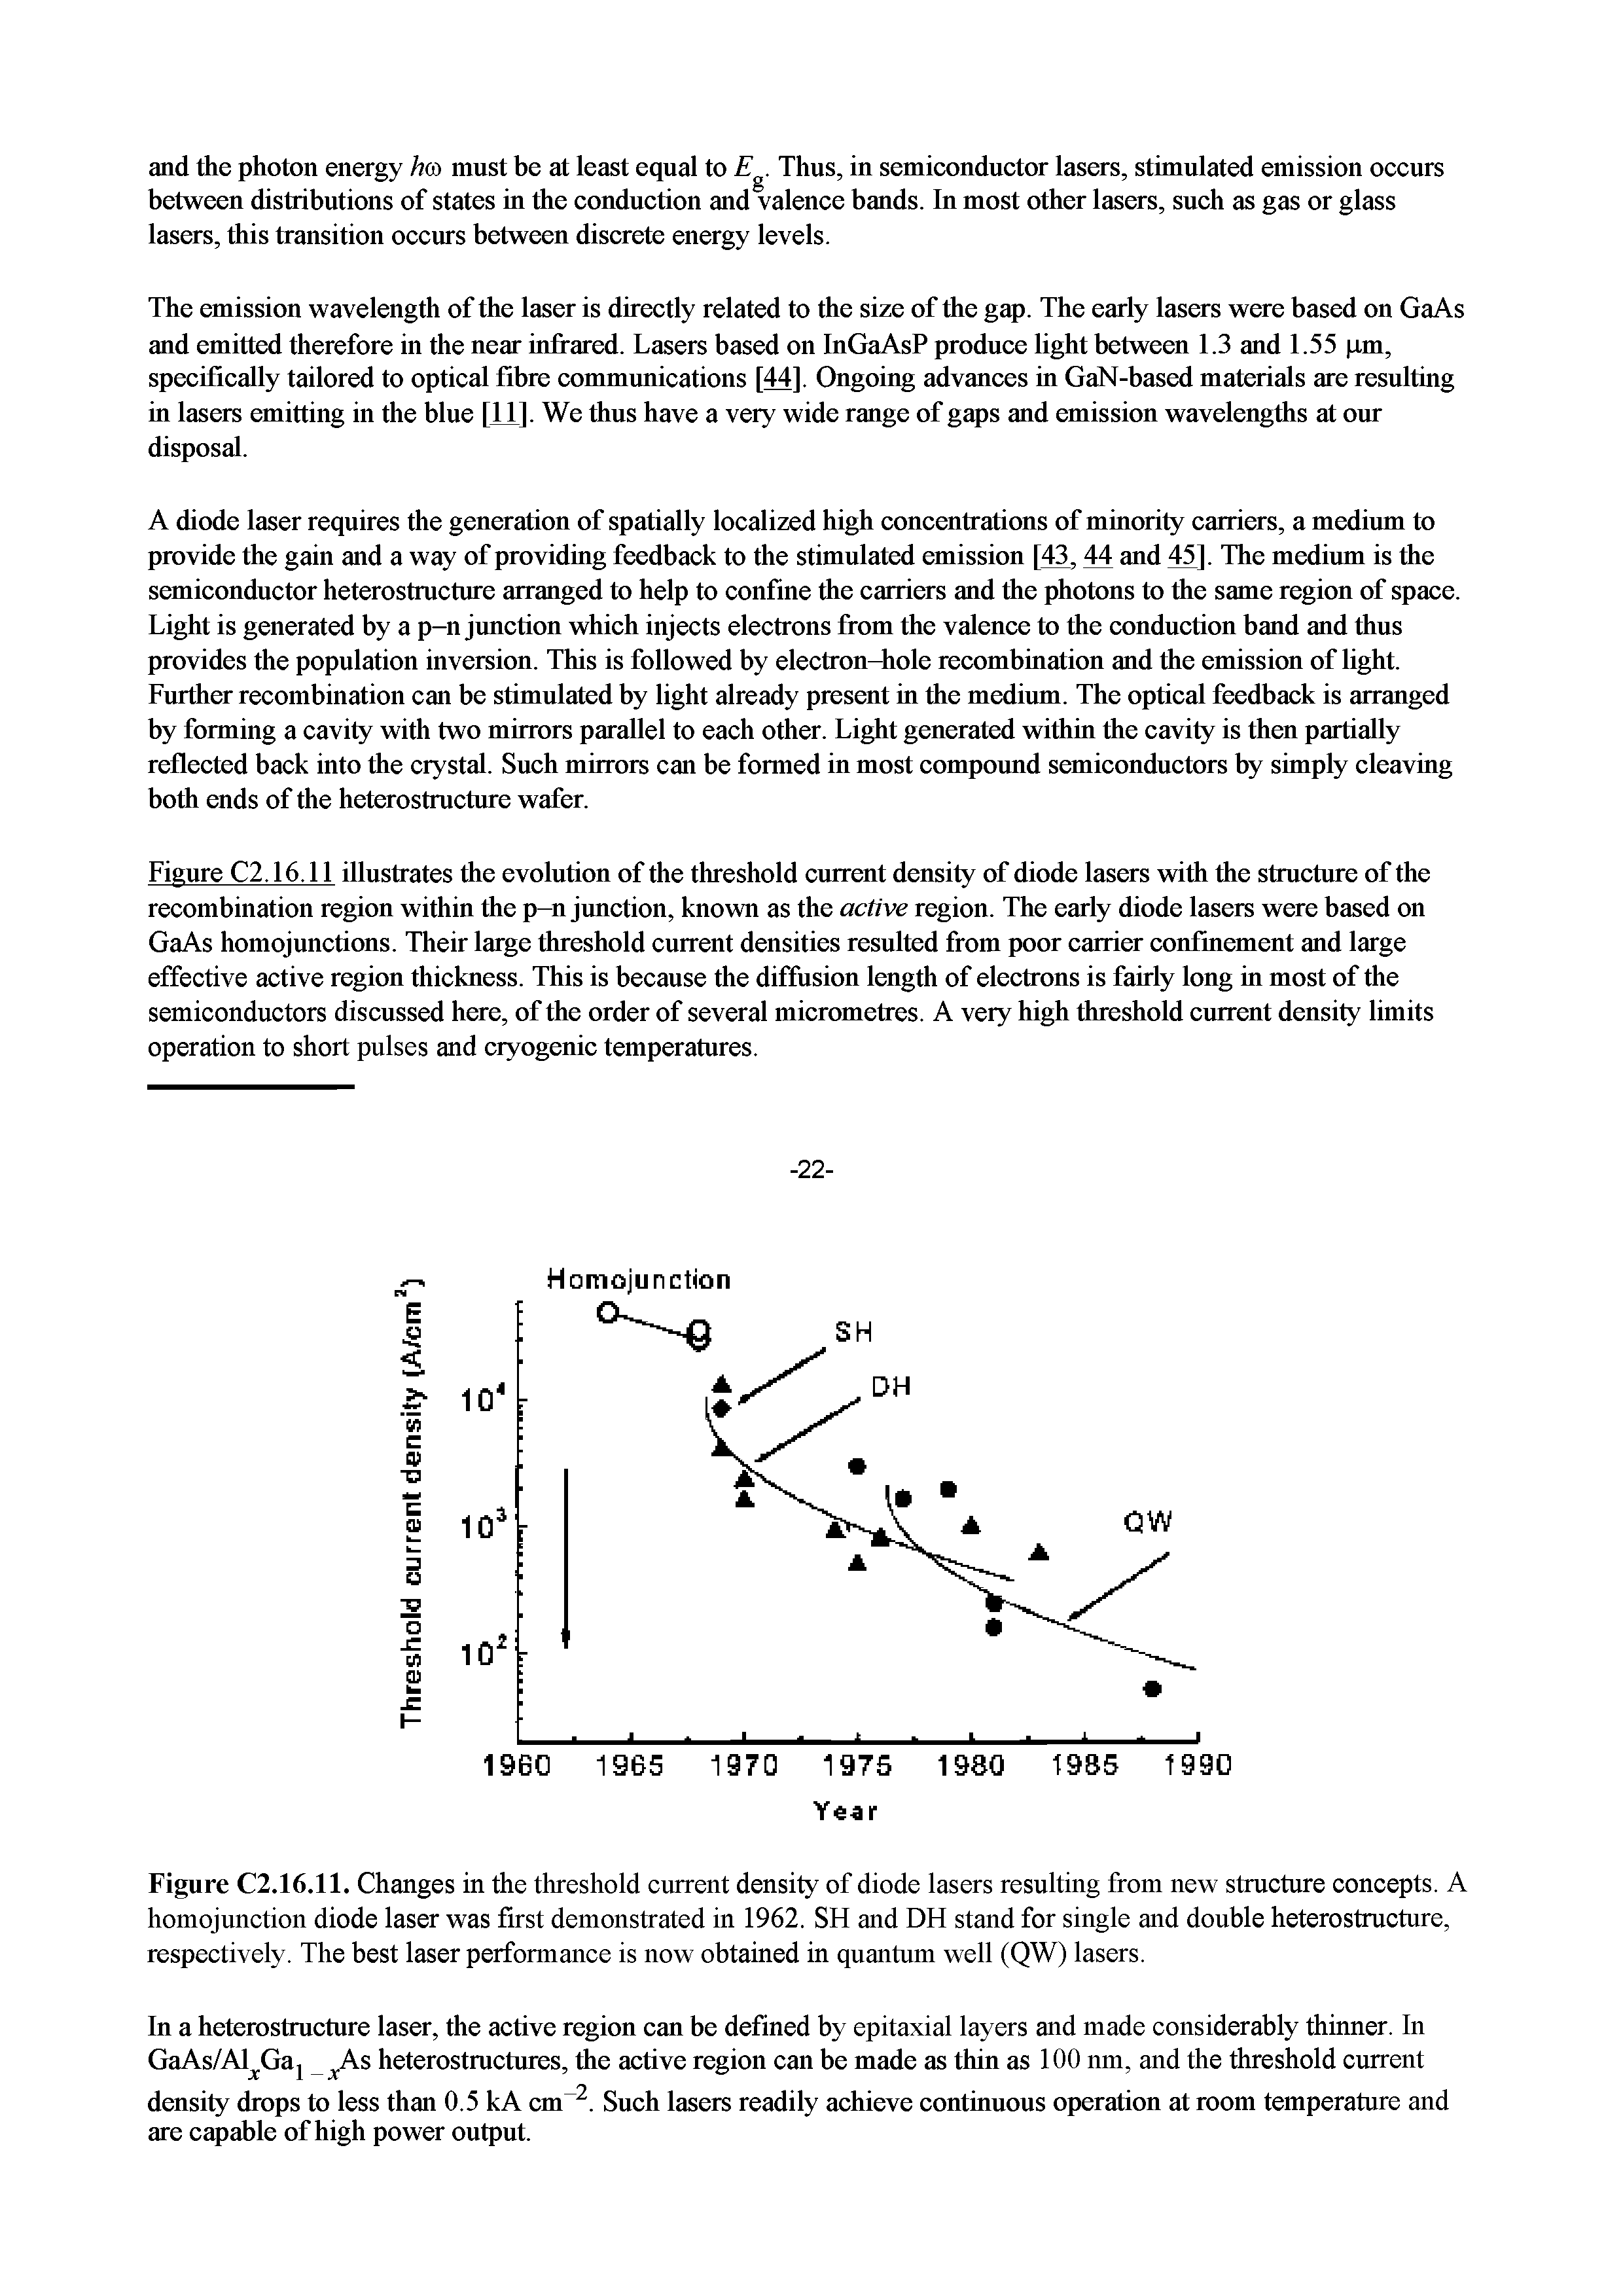 Figure C2.16.ll. Changes in the threshold current density of diode lasers resulting from new structure concepts. A homojunction diode laser was first demonstrated in 1962. SH and DH stand for single and double heterostructure, respectively. The best laser performance is now obtained in quantum well (QW) lasers.